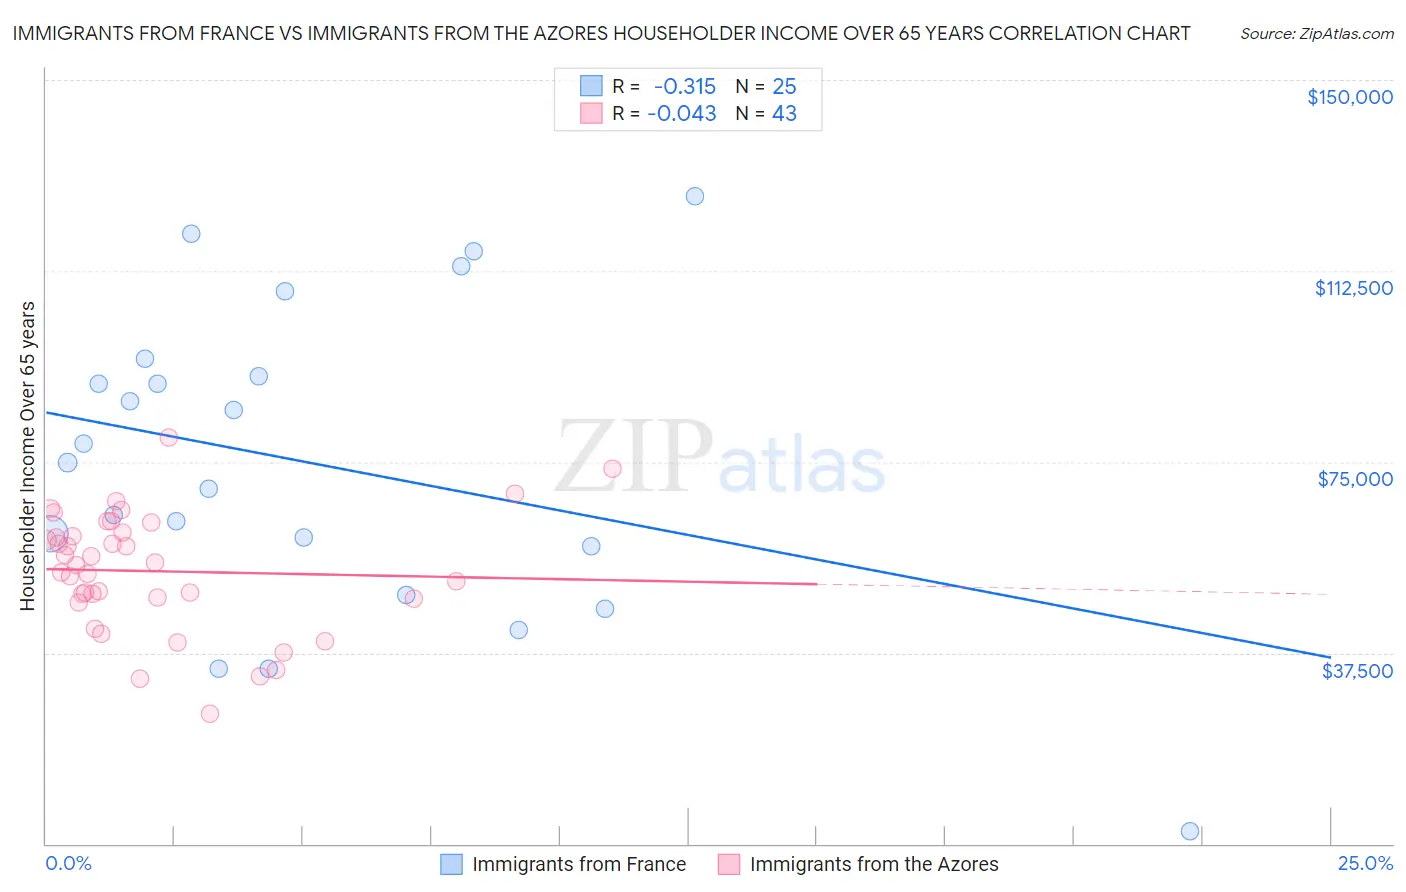 Immigrants from France vs Immigrants from the Azores Householder Income Over 65 years